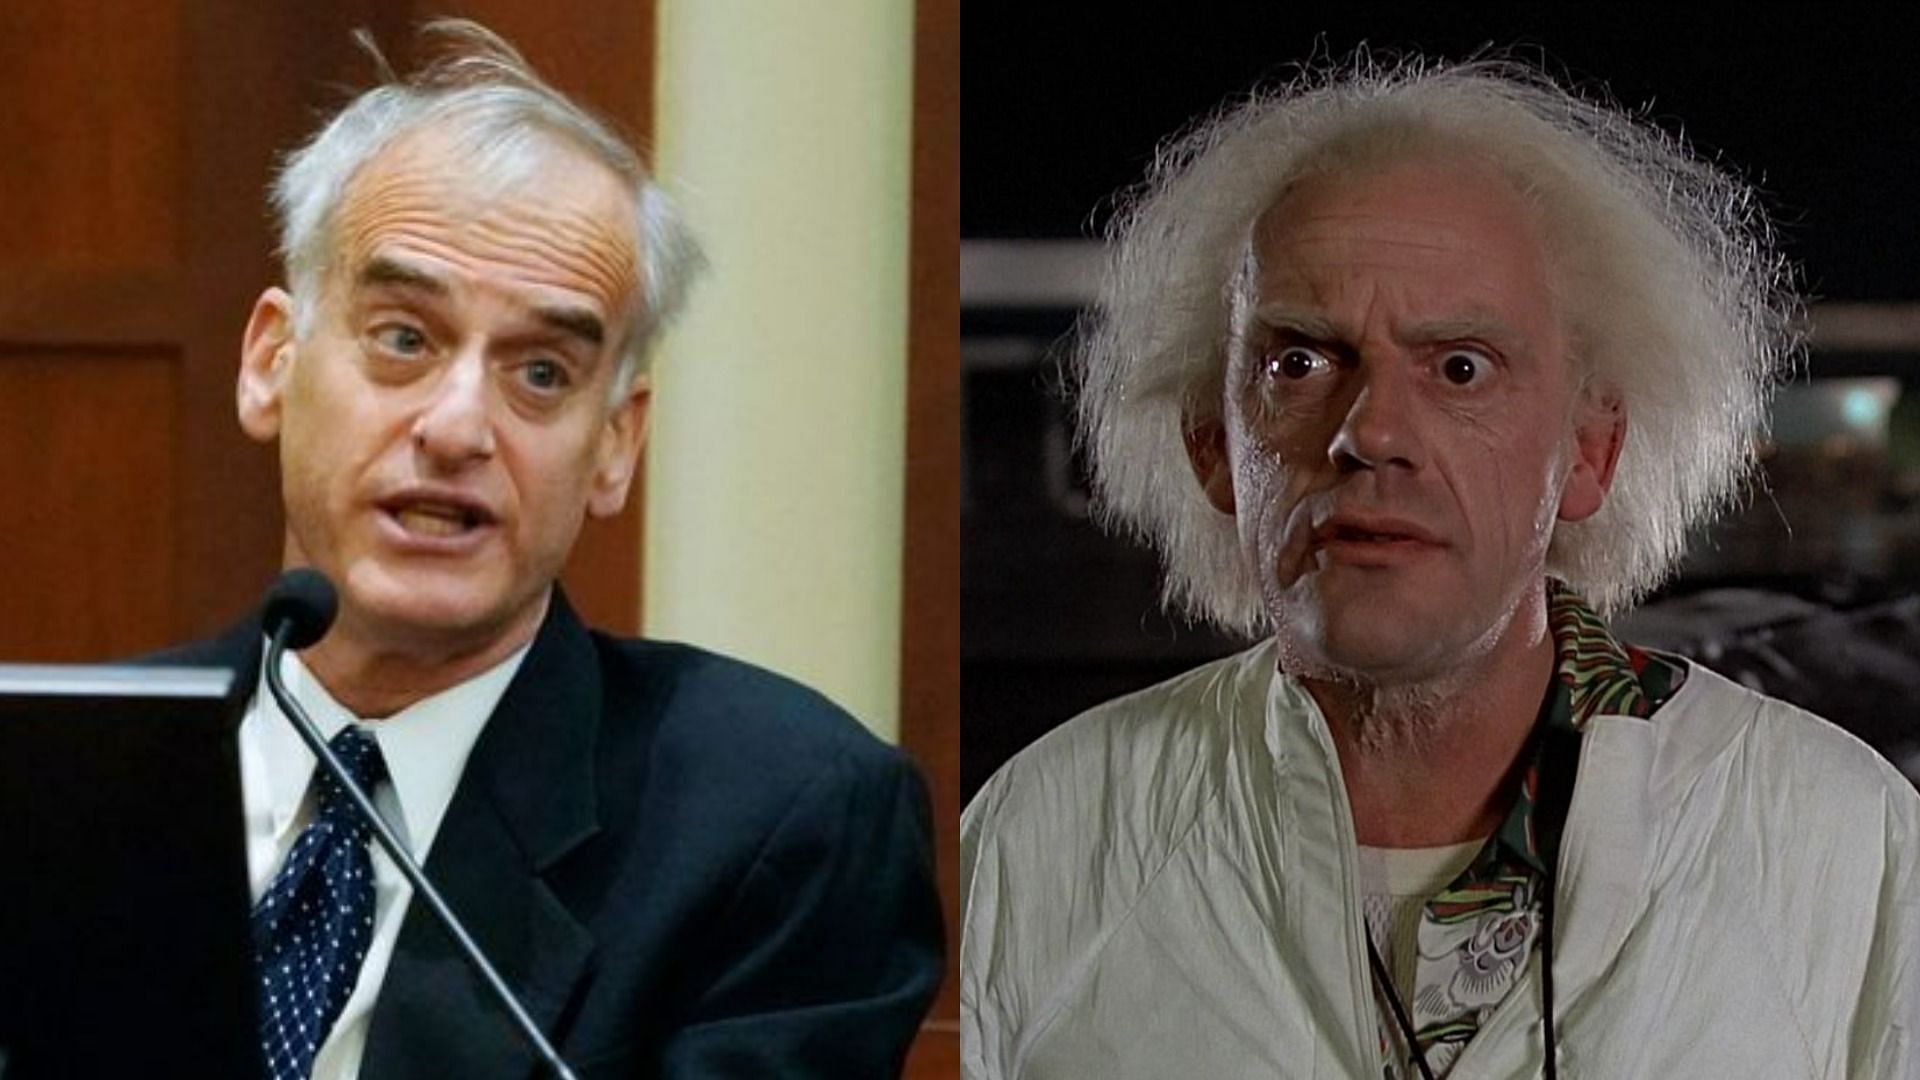 Internet compares Dr. David Spiegel to Doc Brown (Image via Getty Images and MovieClips/YouTube)